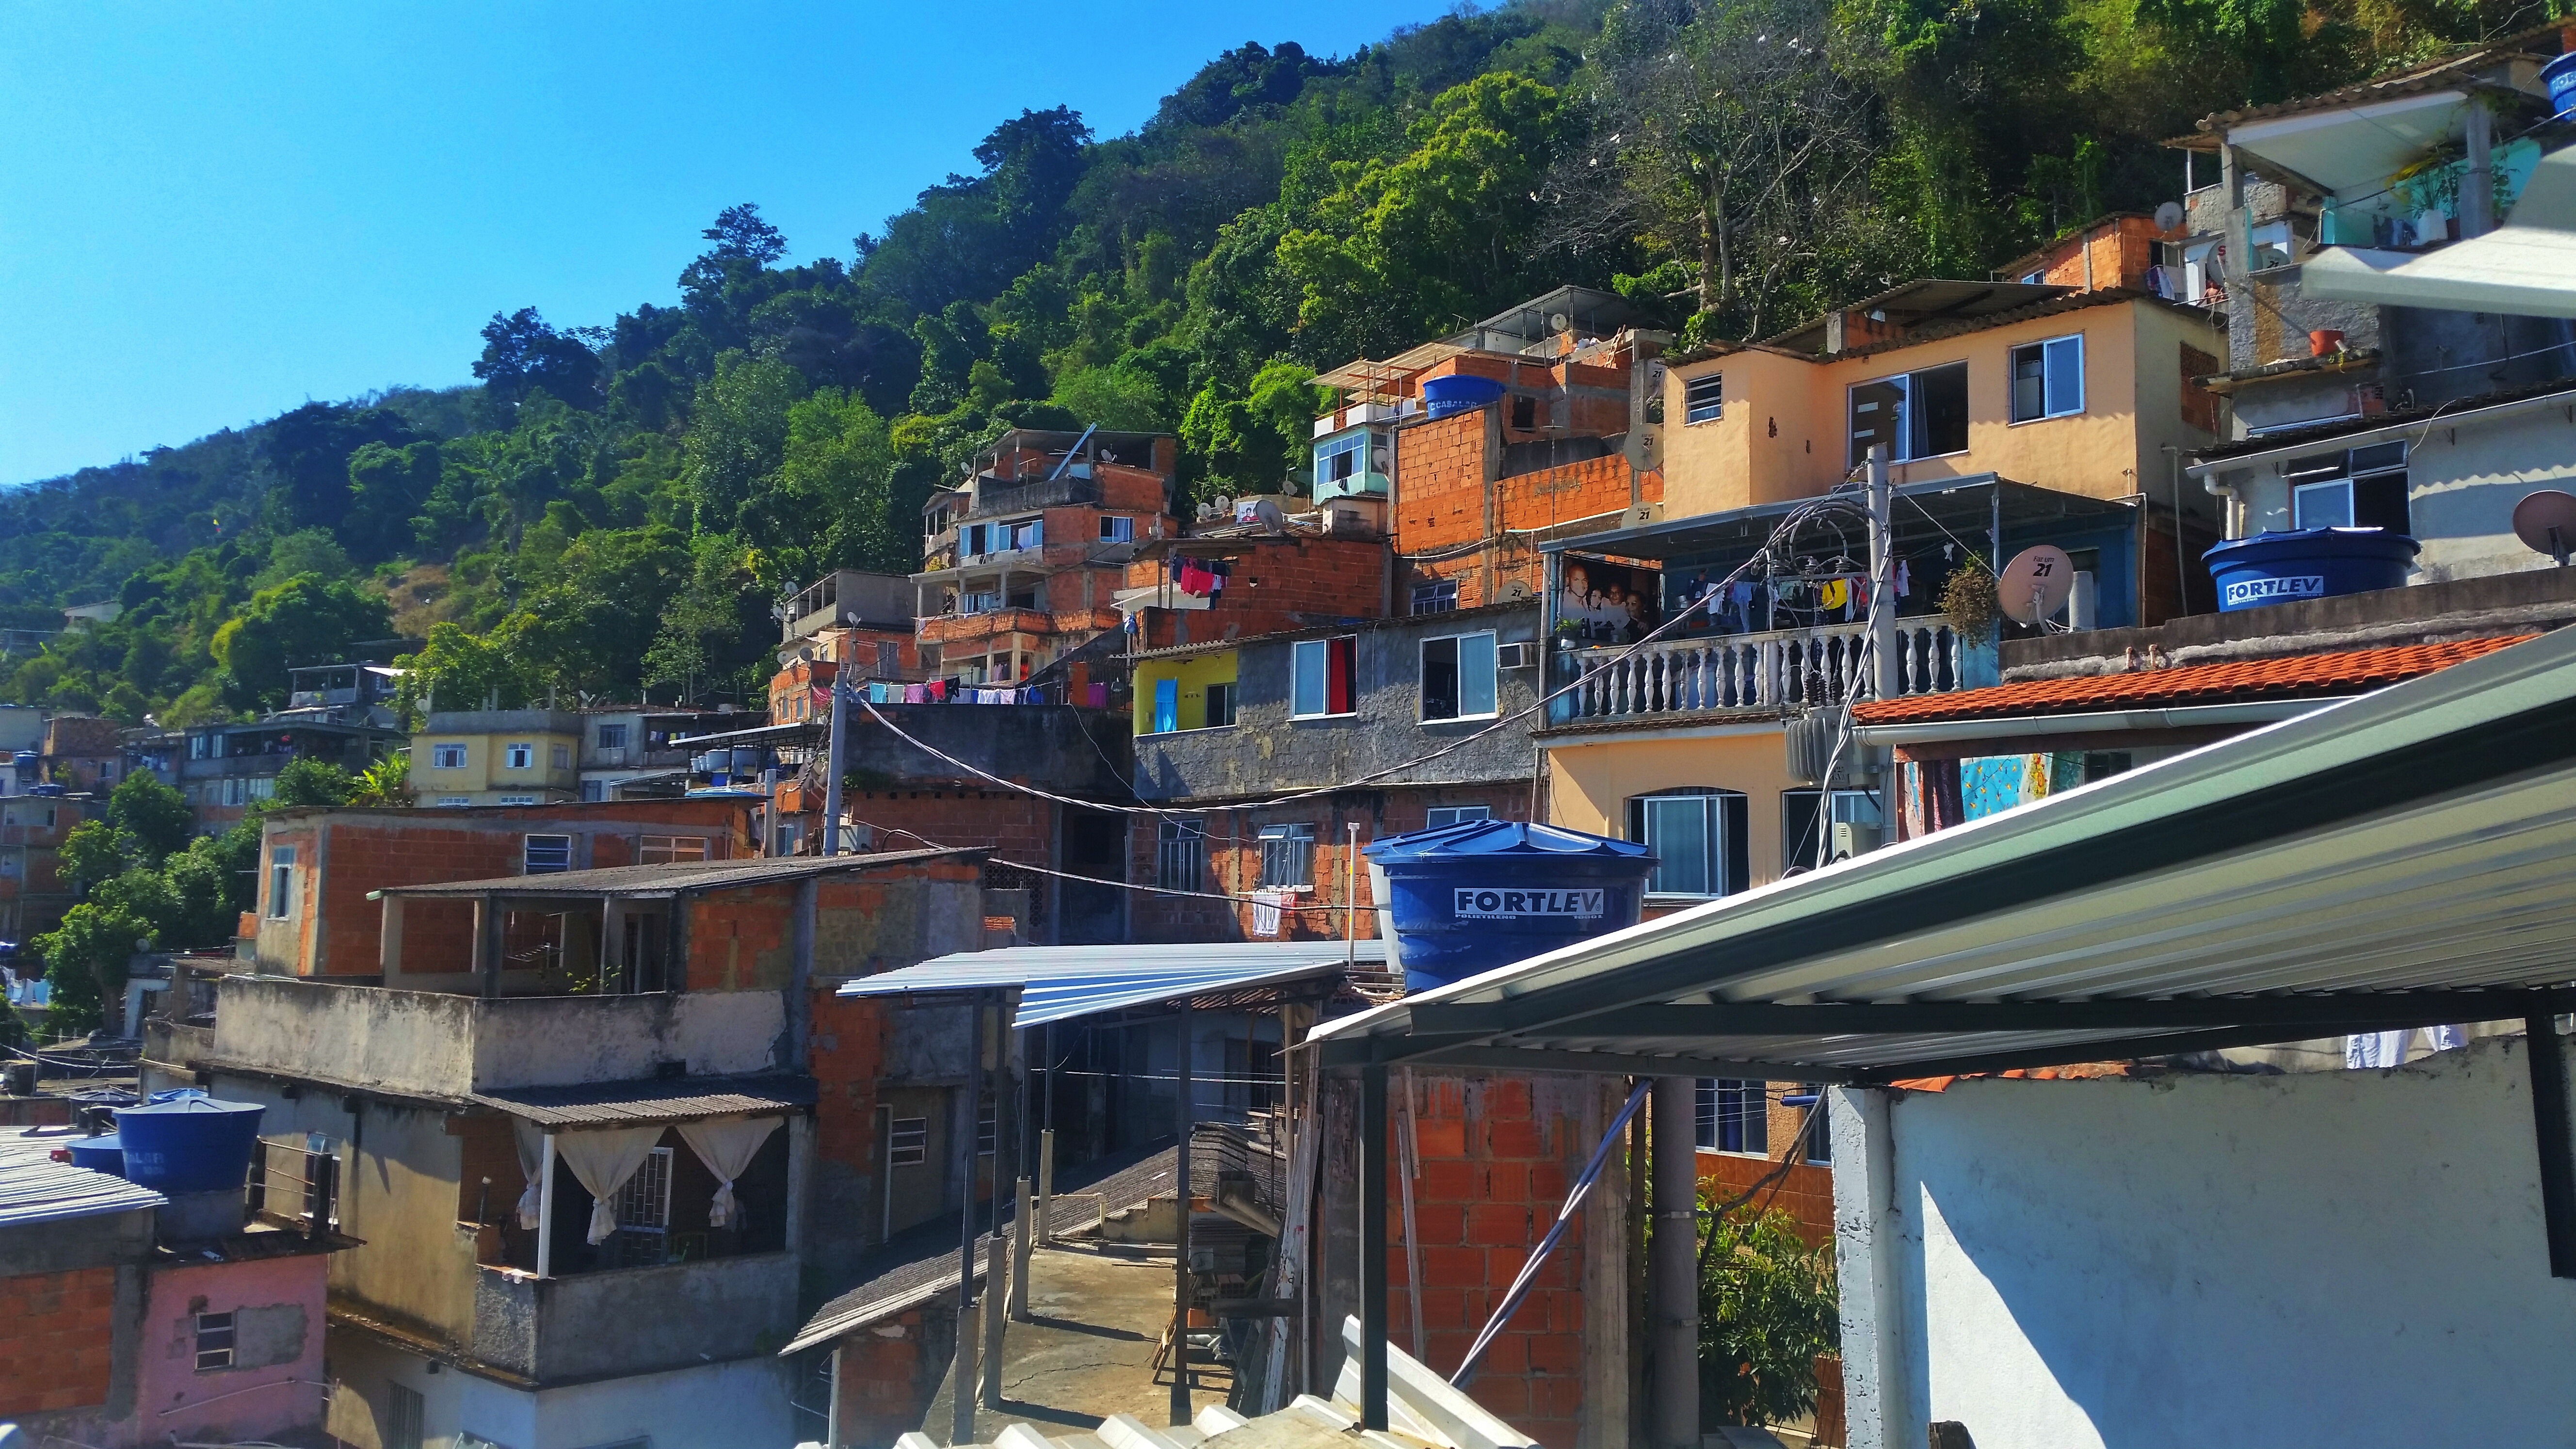 Is it safe for tourists to visit the favelas in Rio de Janeiro? This is the view from the guesthouse we stayed in!